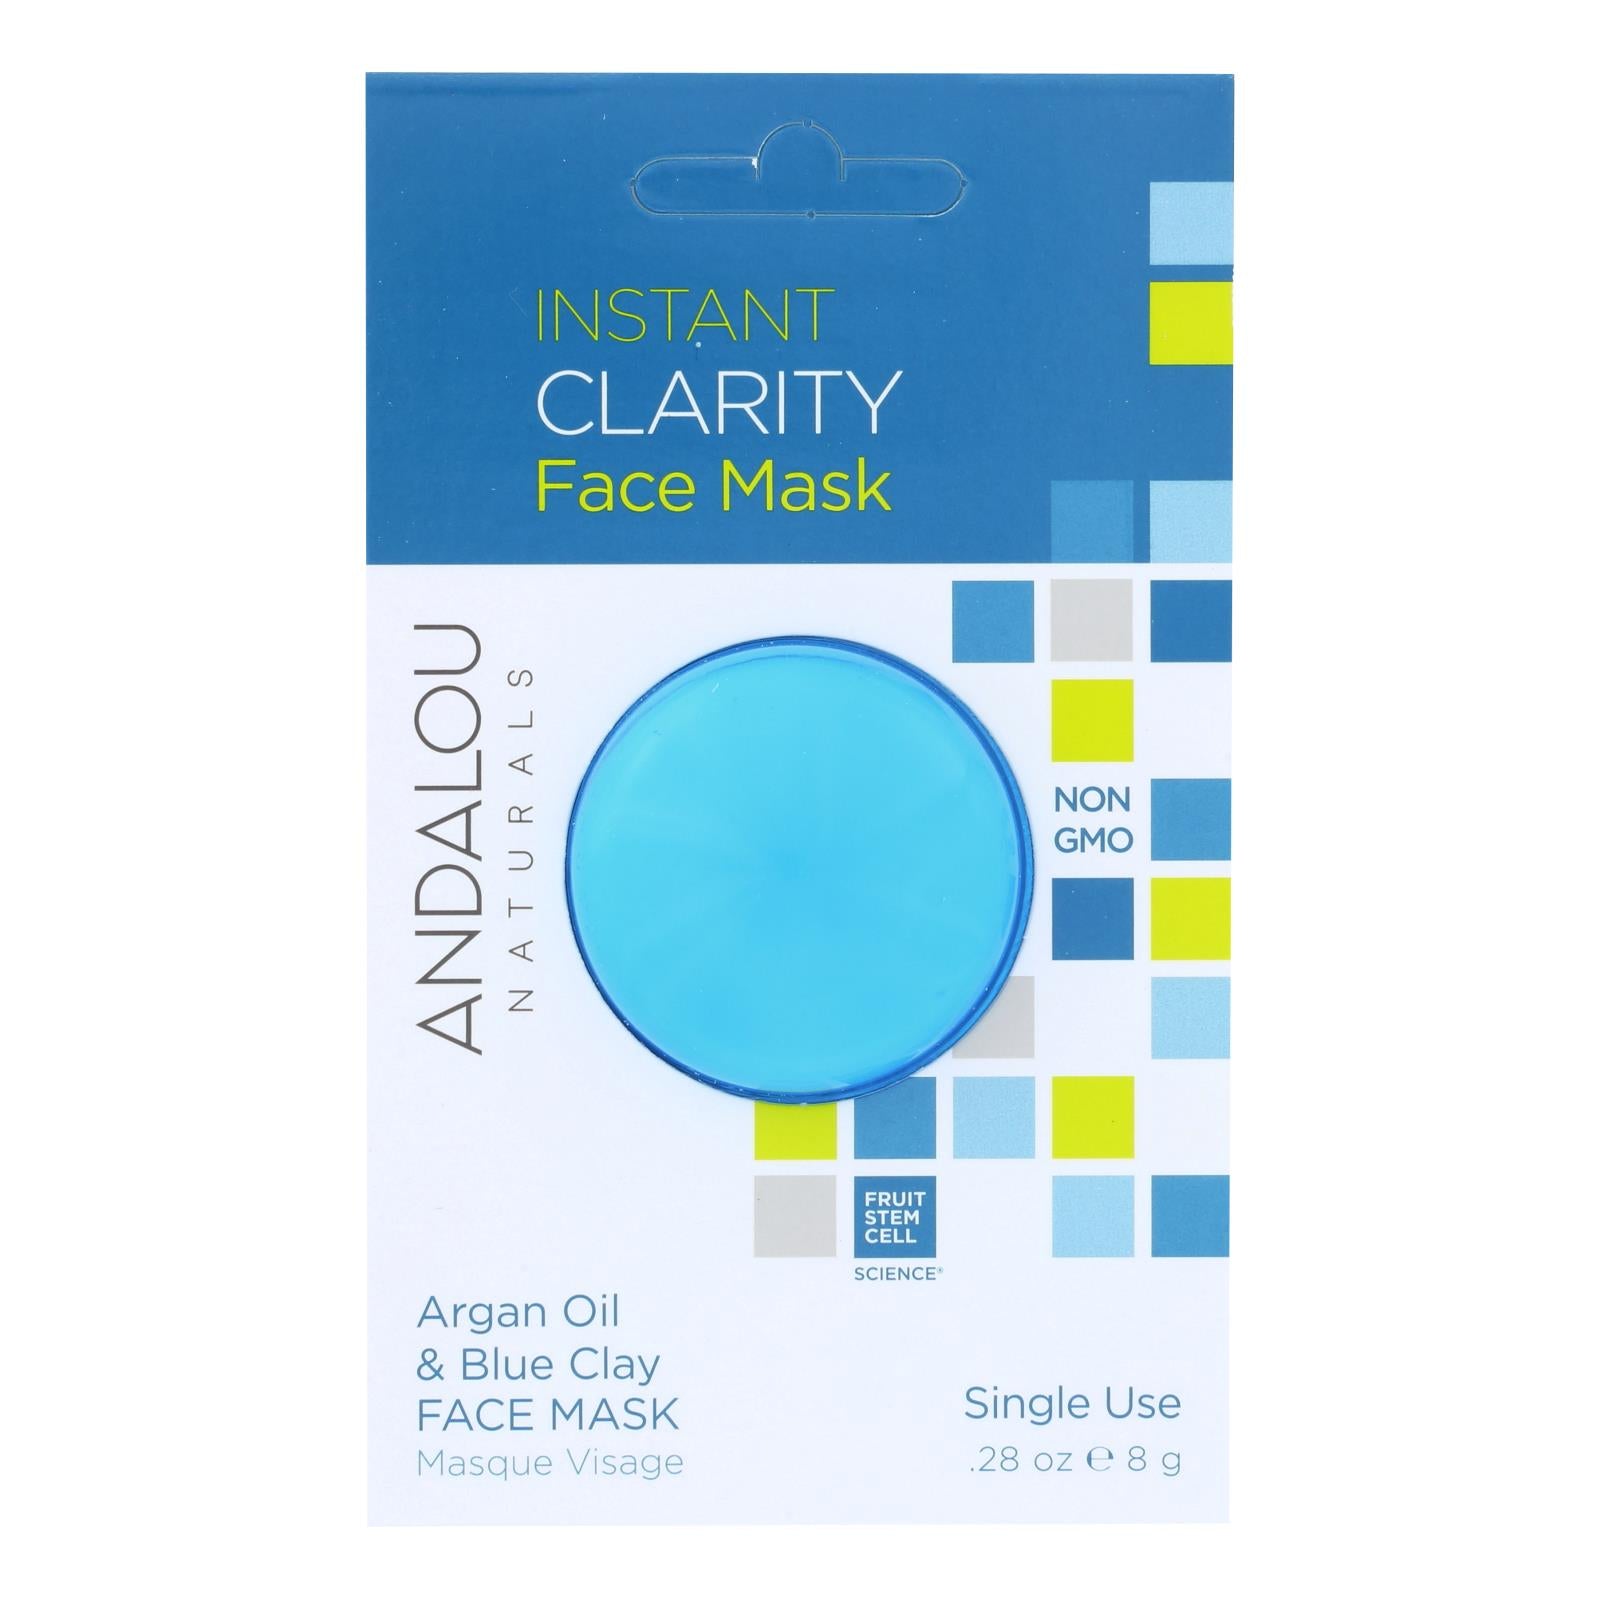 Andalou Naturals, andalou Naturals Instant Clarity Face Mask - Argan Oil & Blue Clay - Case of 6 - 0.28 oz (Pack of 6)